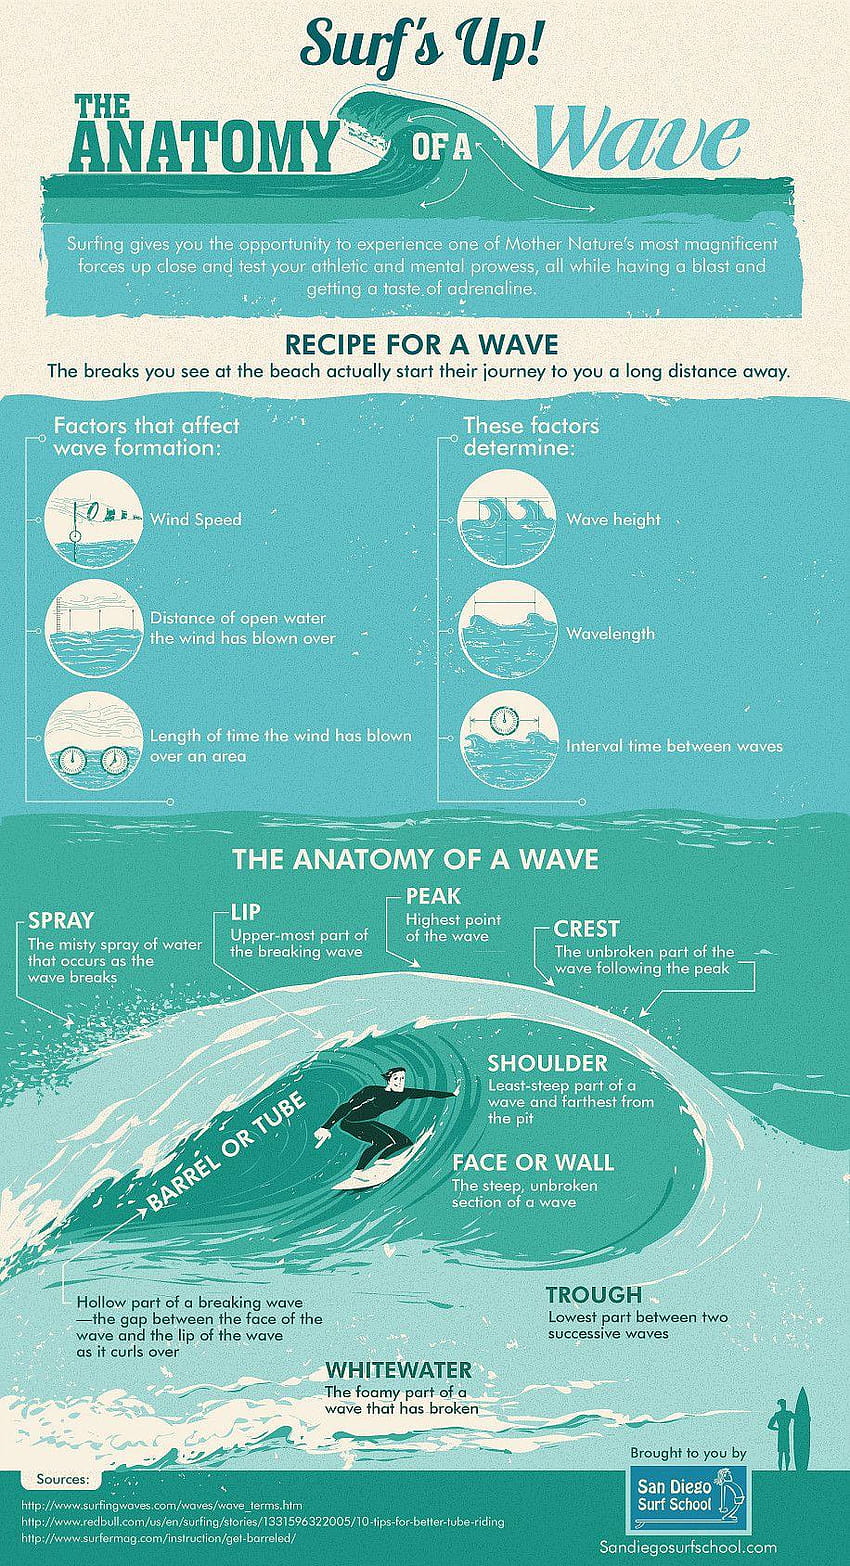 Surf's Up! The Anatomy of a Wave, broucher surfing HD phone wallpaper